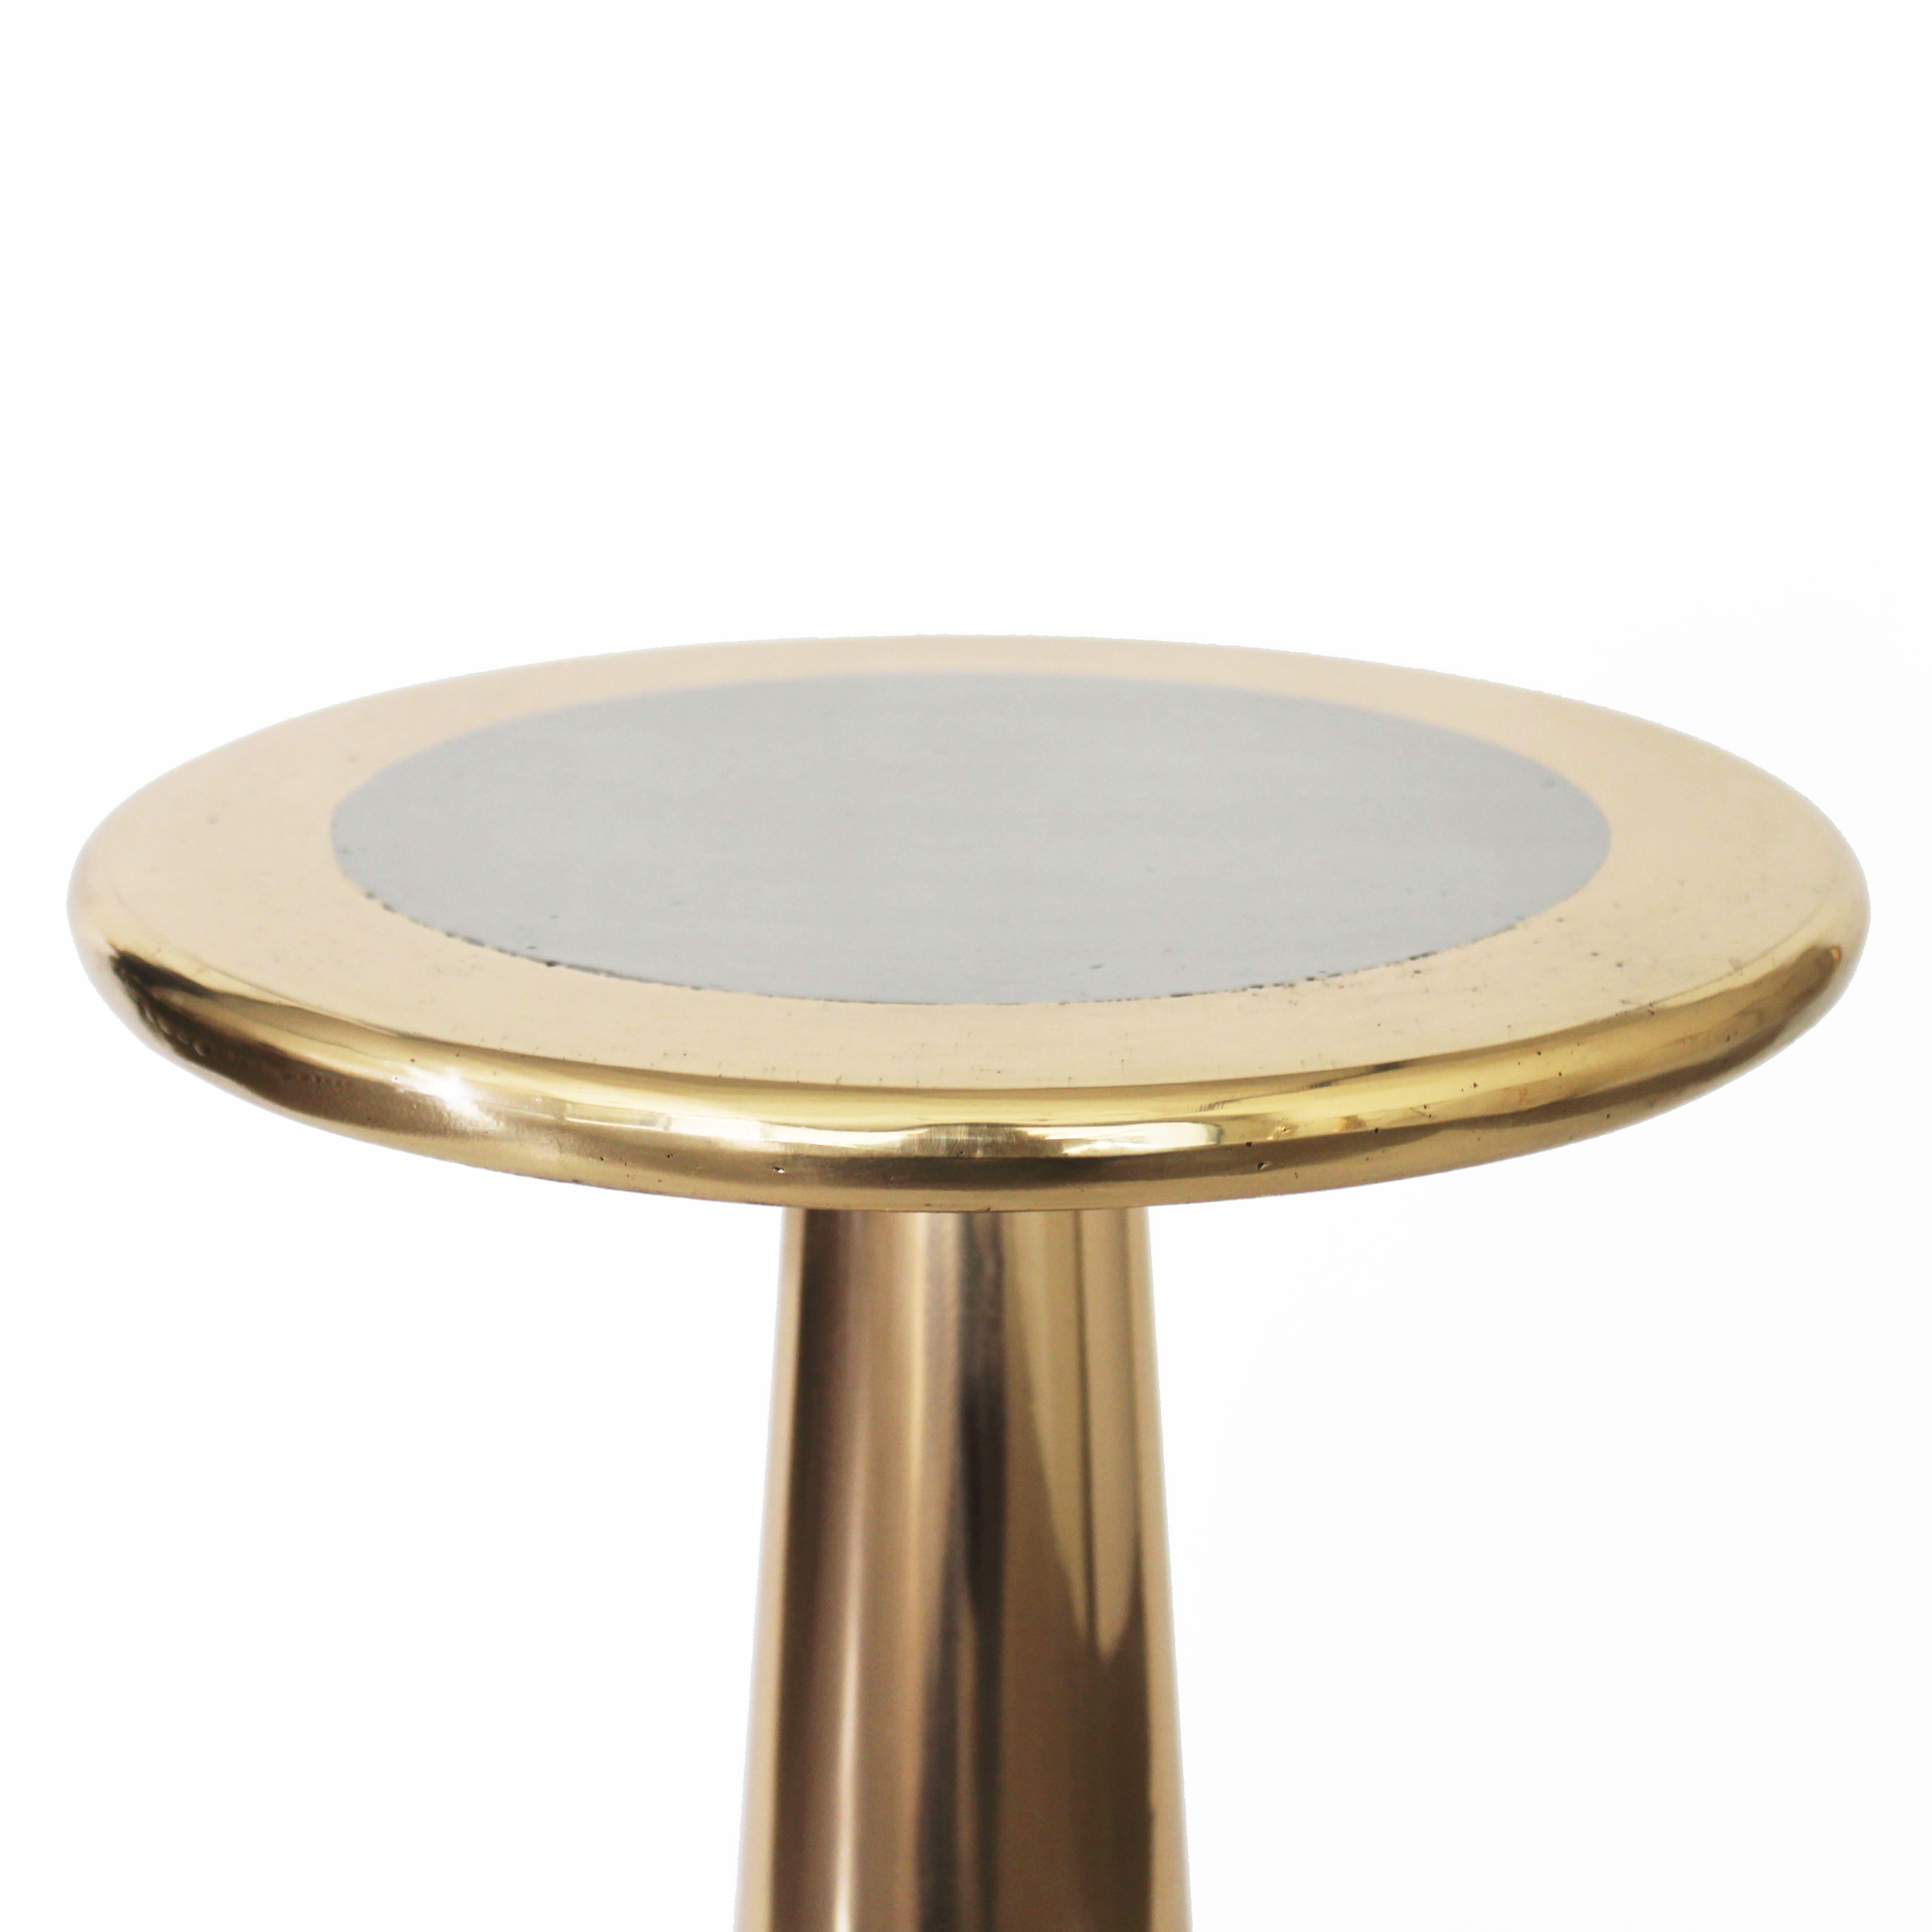 Contemporary Cast Bronze and Stainless Steel Lega Side Table by Studio Sunt